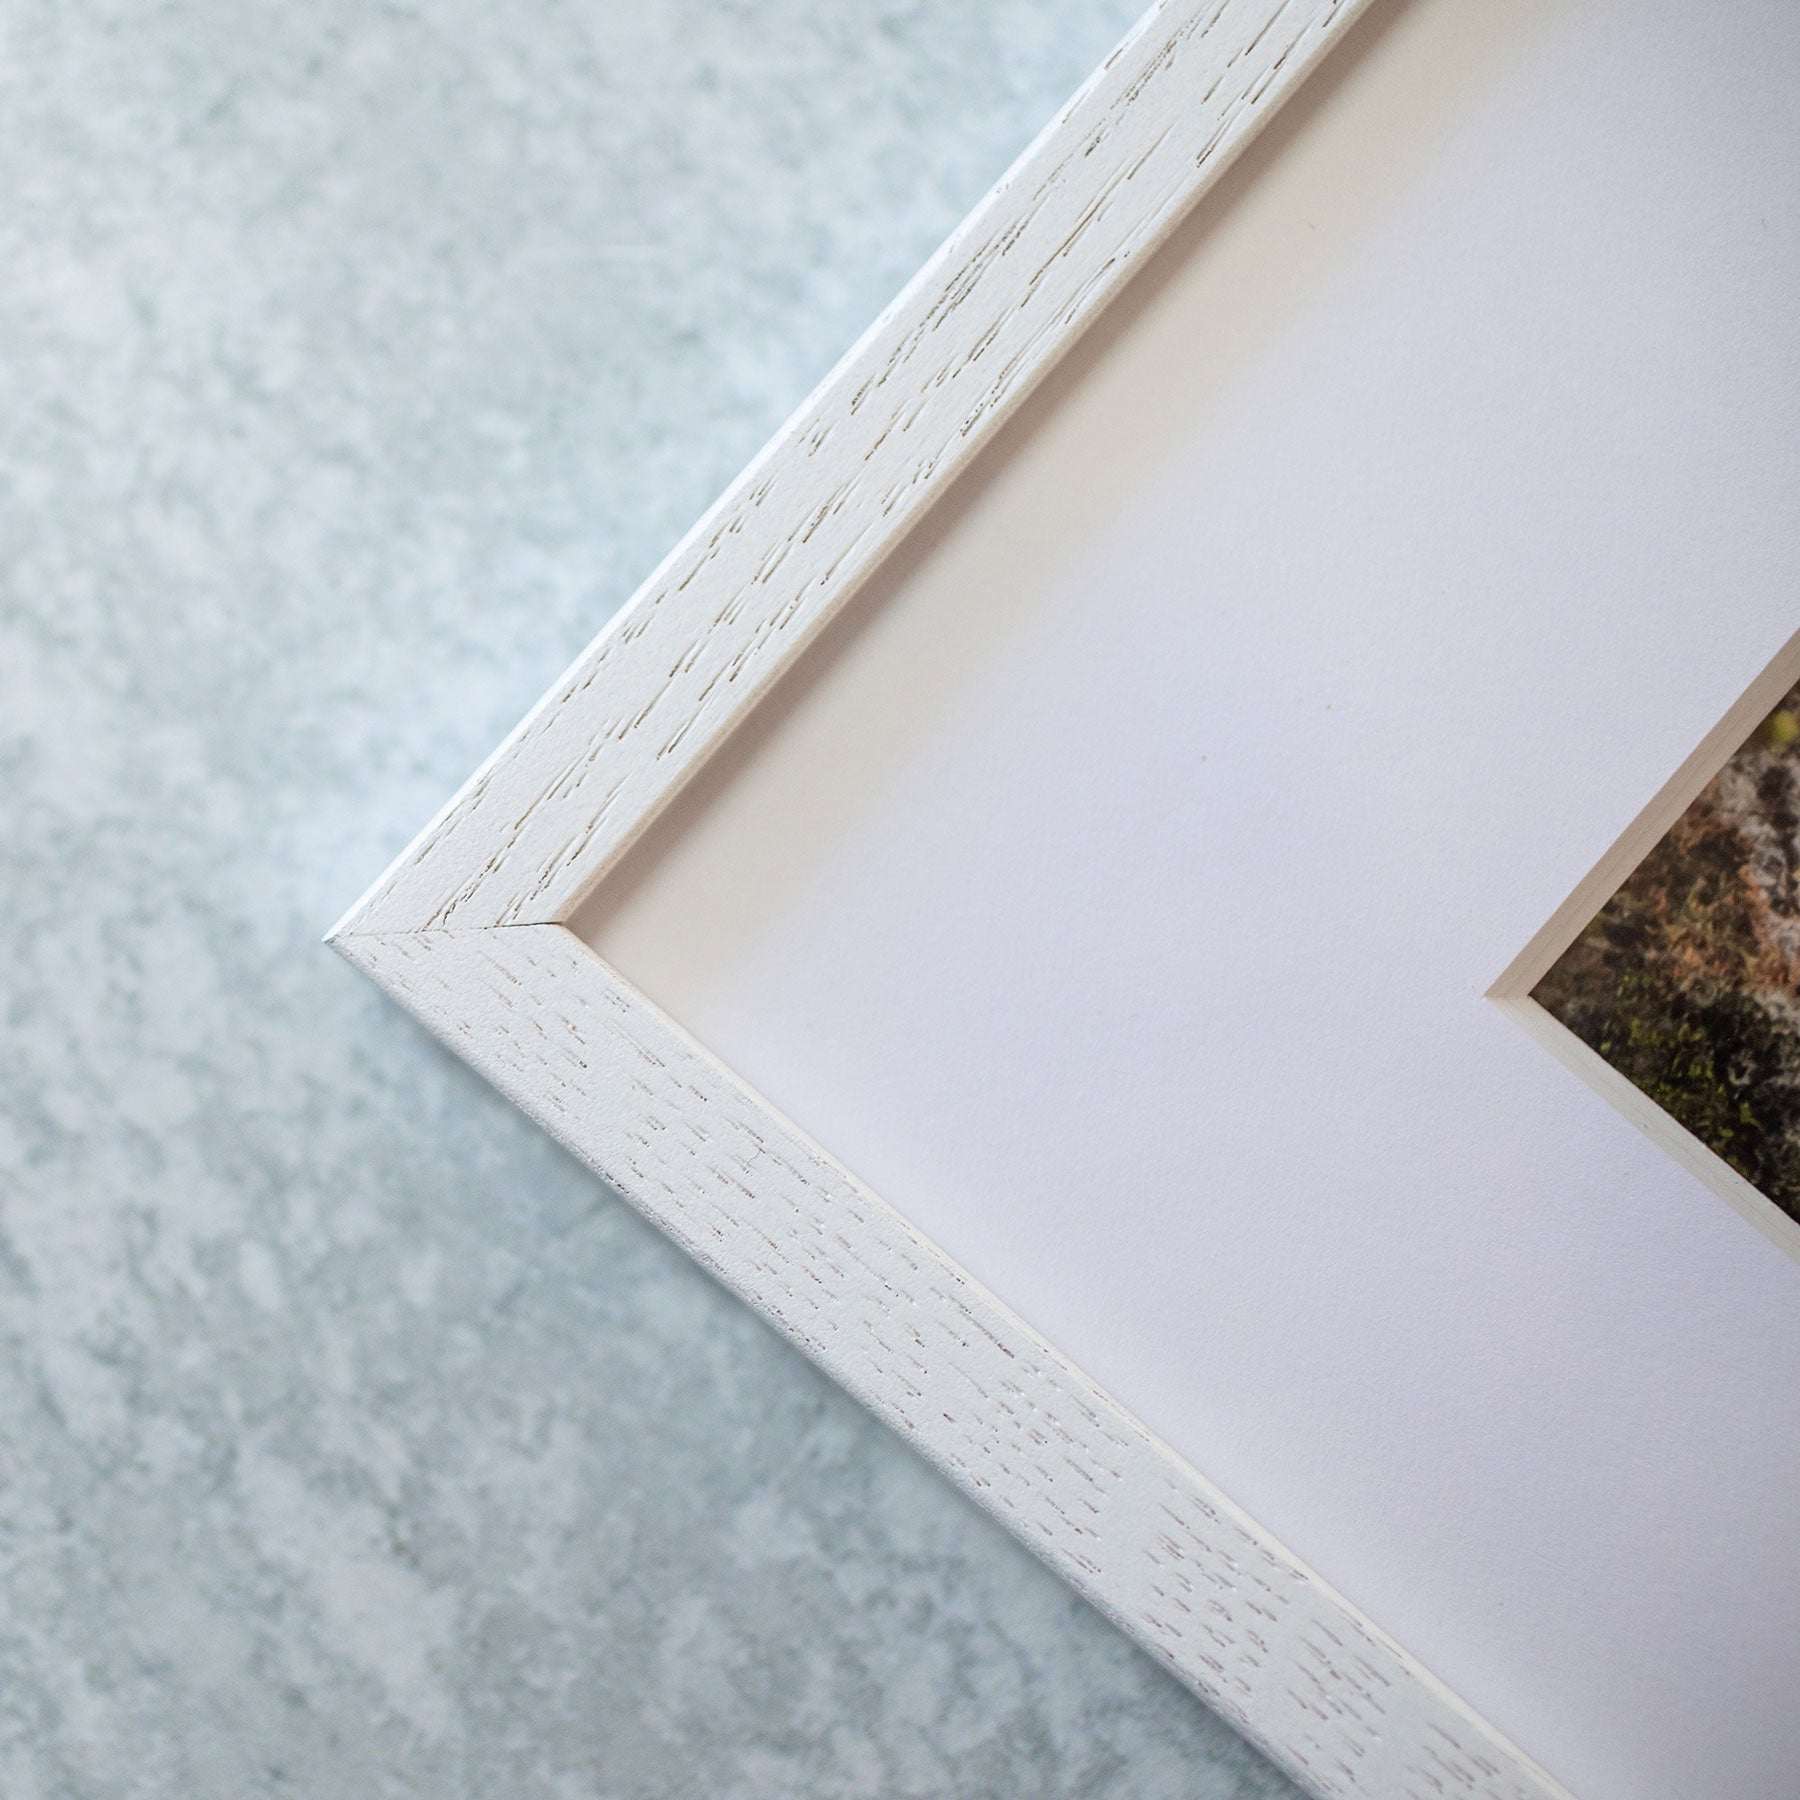 A close-up shot of the corner of a white picture frame. The frame has a textured finish, and part of the enclosed Moody Nautical Seascape Print, &#39;Sail Boats Approaching&#39; by Offley Green is visible on the right side. The background is a light, speckled surface.